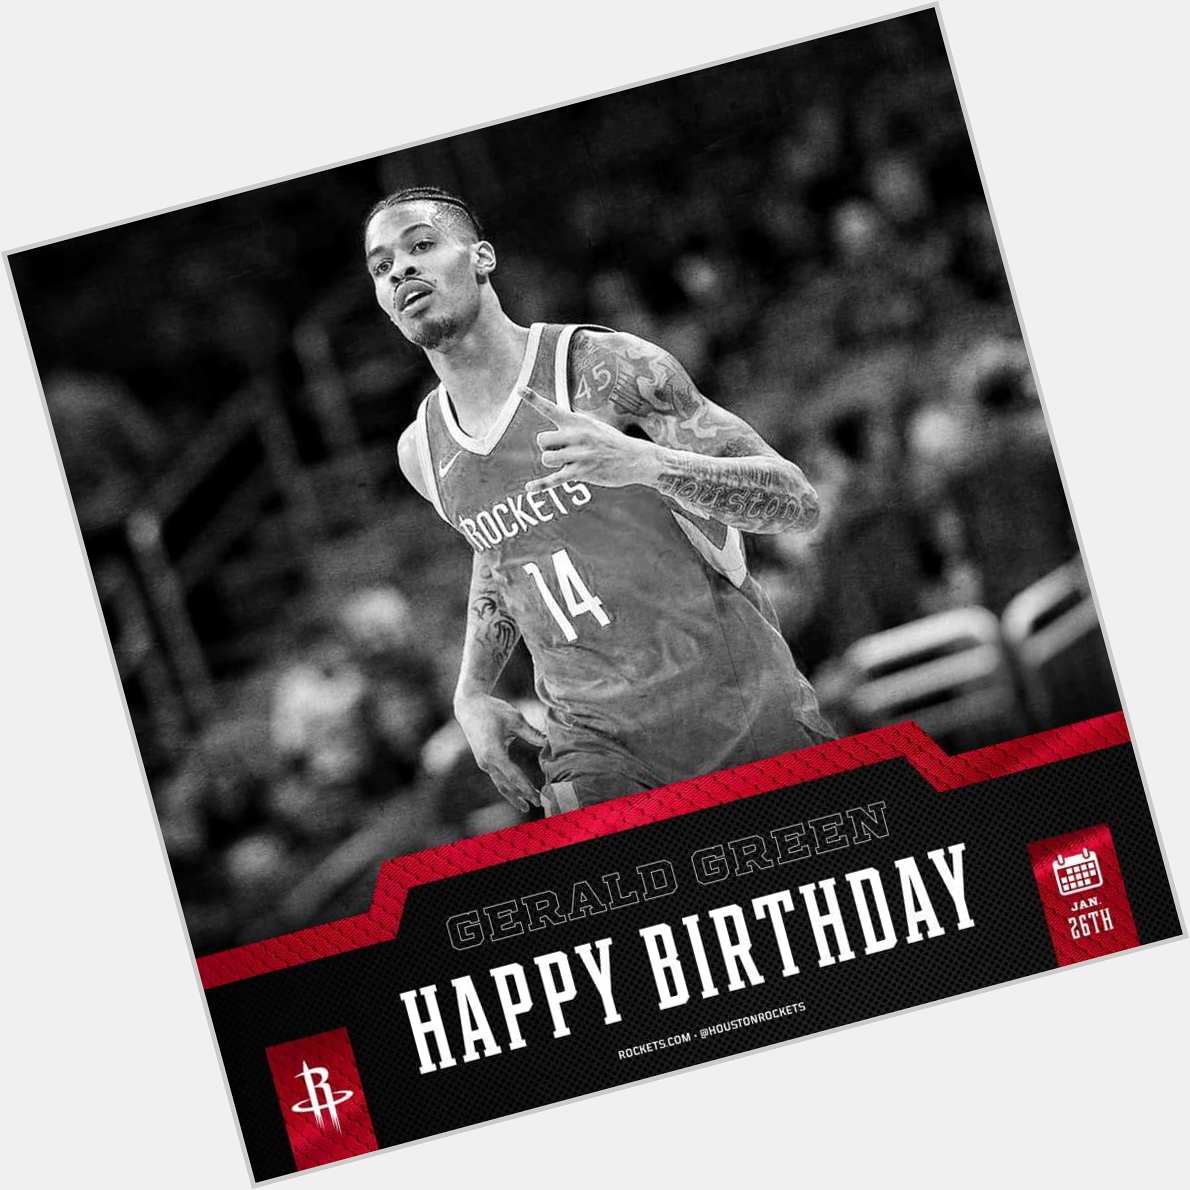 Join us in wishing Gerald Green a Happy Birthday!  